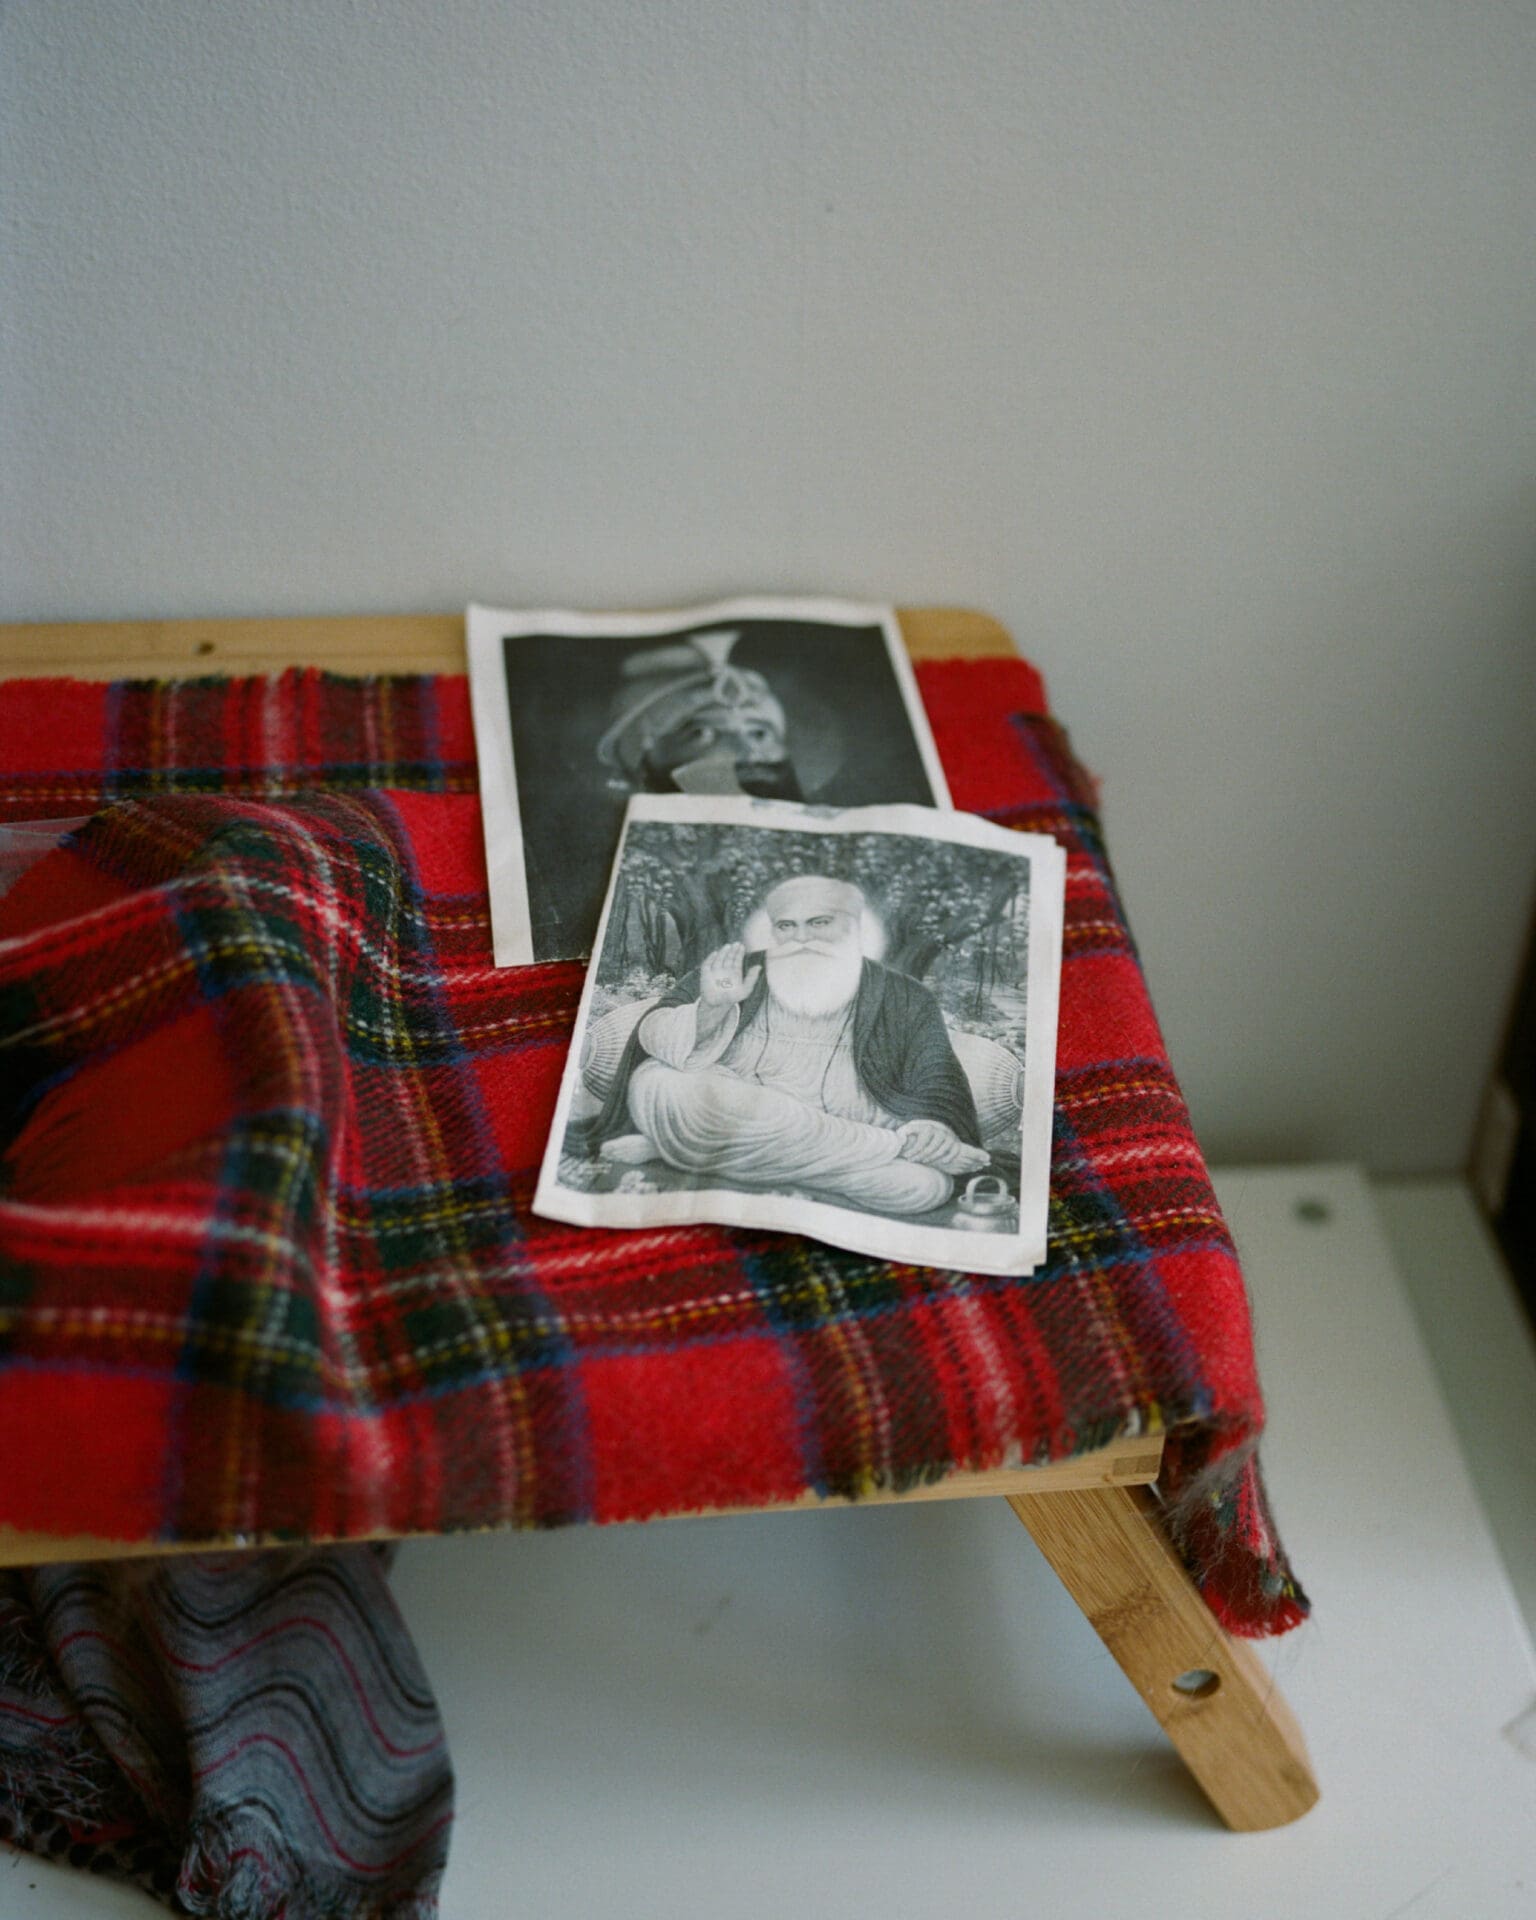 An interview with poet Nikita Gill | Two black and white photos lie on a tartan blanket on a bench